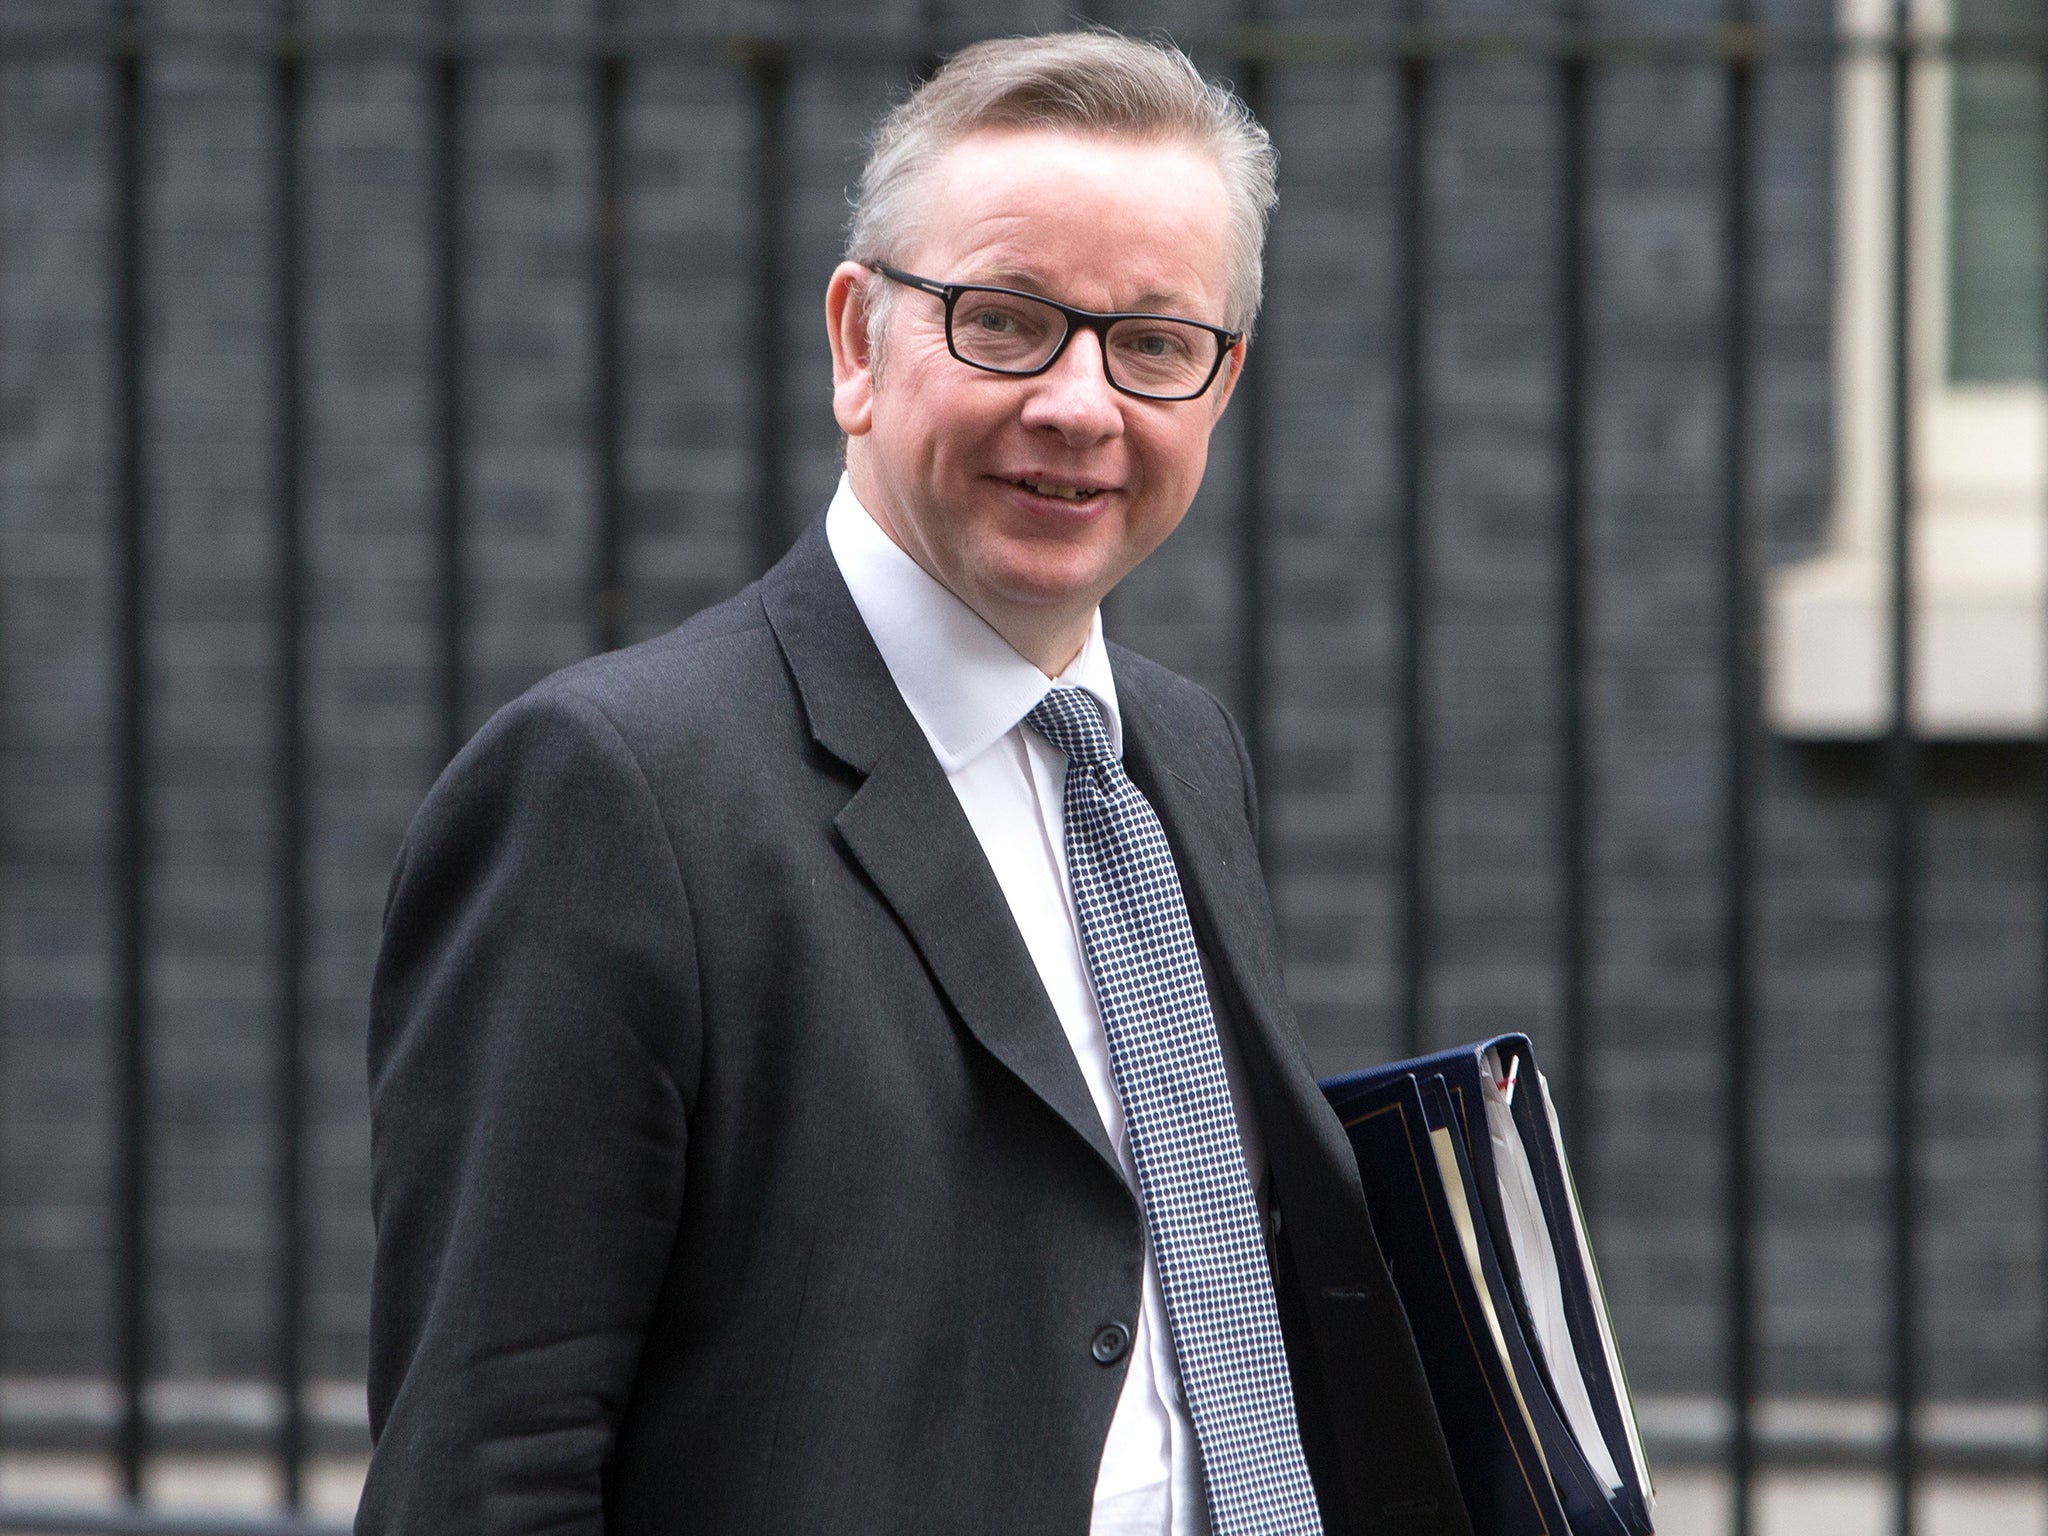 Former education secretary Michael Gove is a major proponent of academies